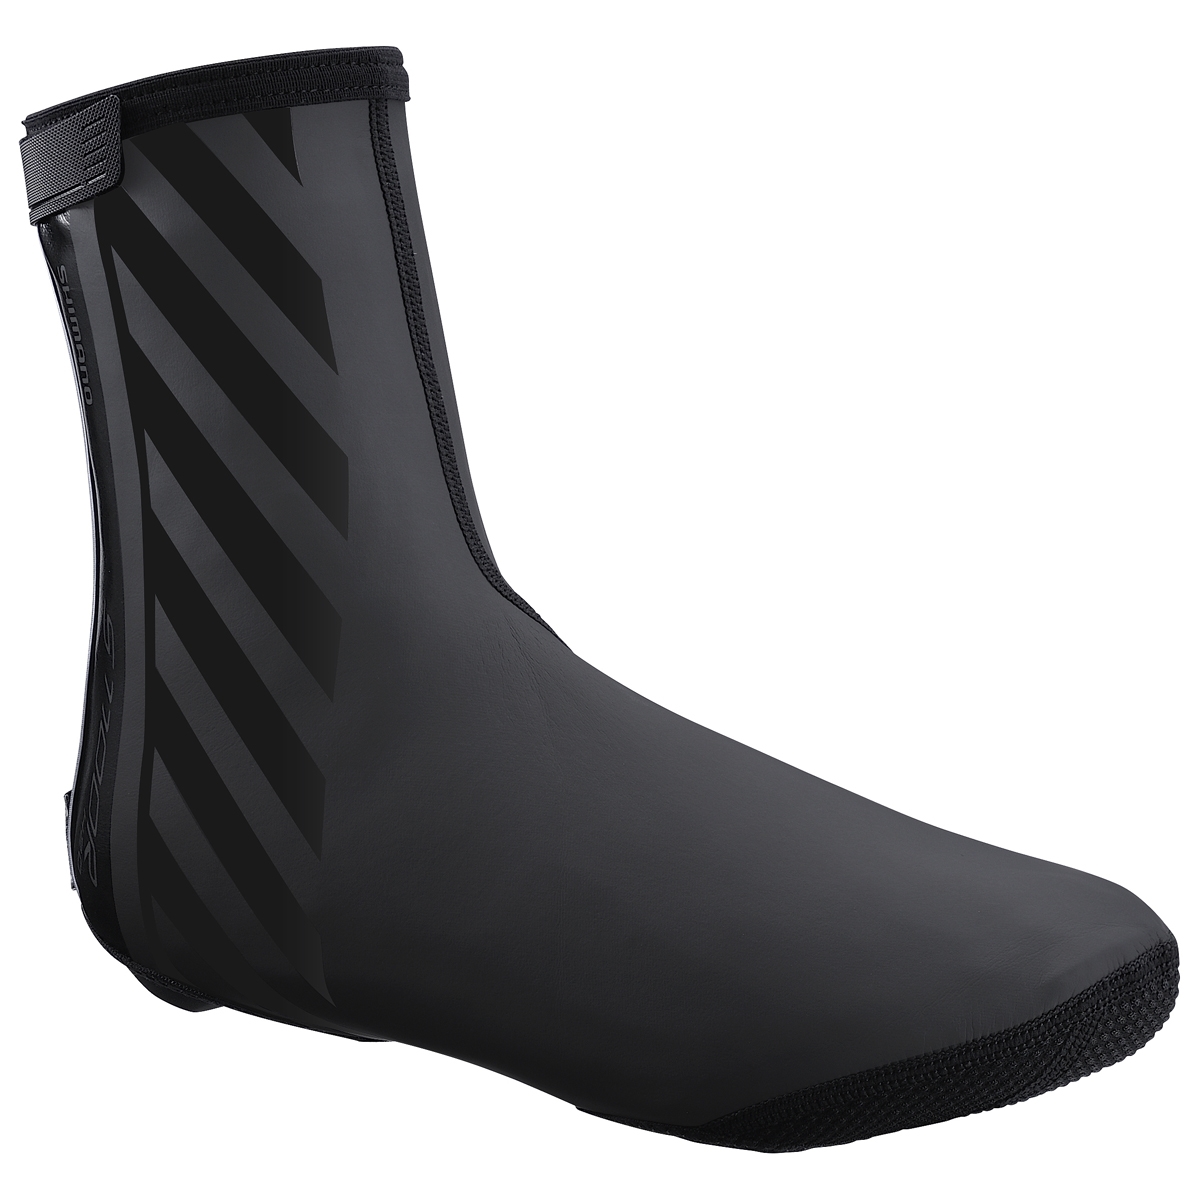 Shoe covers road S1100R H2O black size L (42-44)